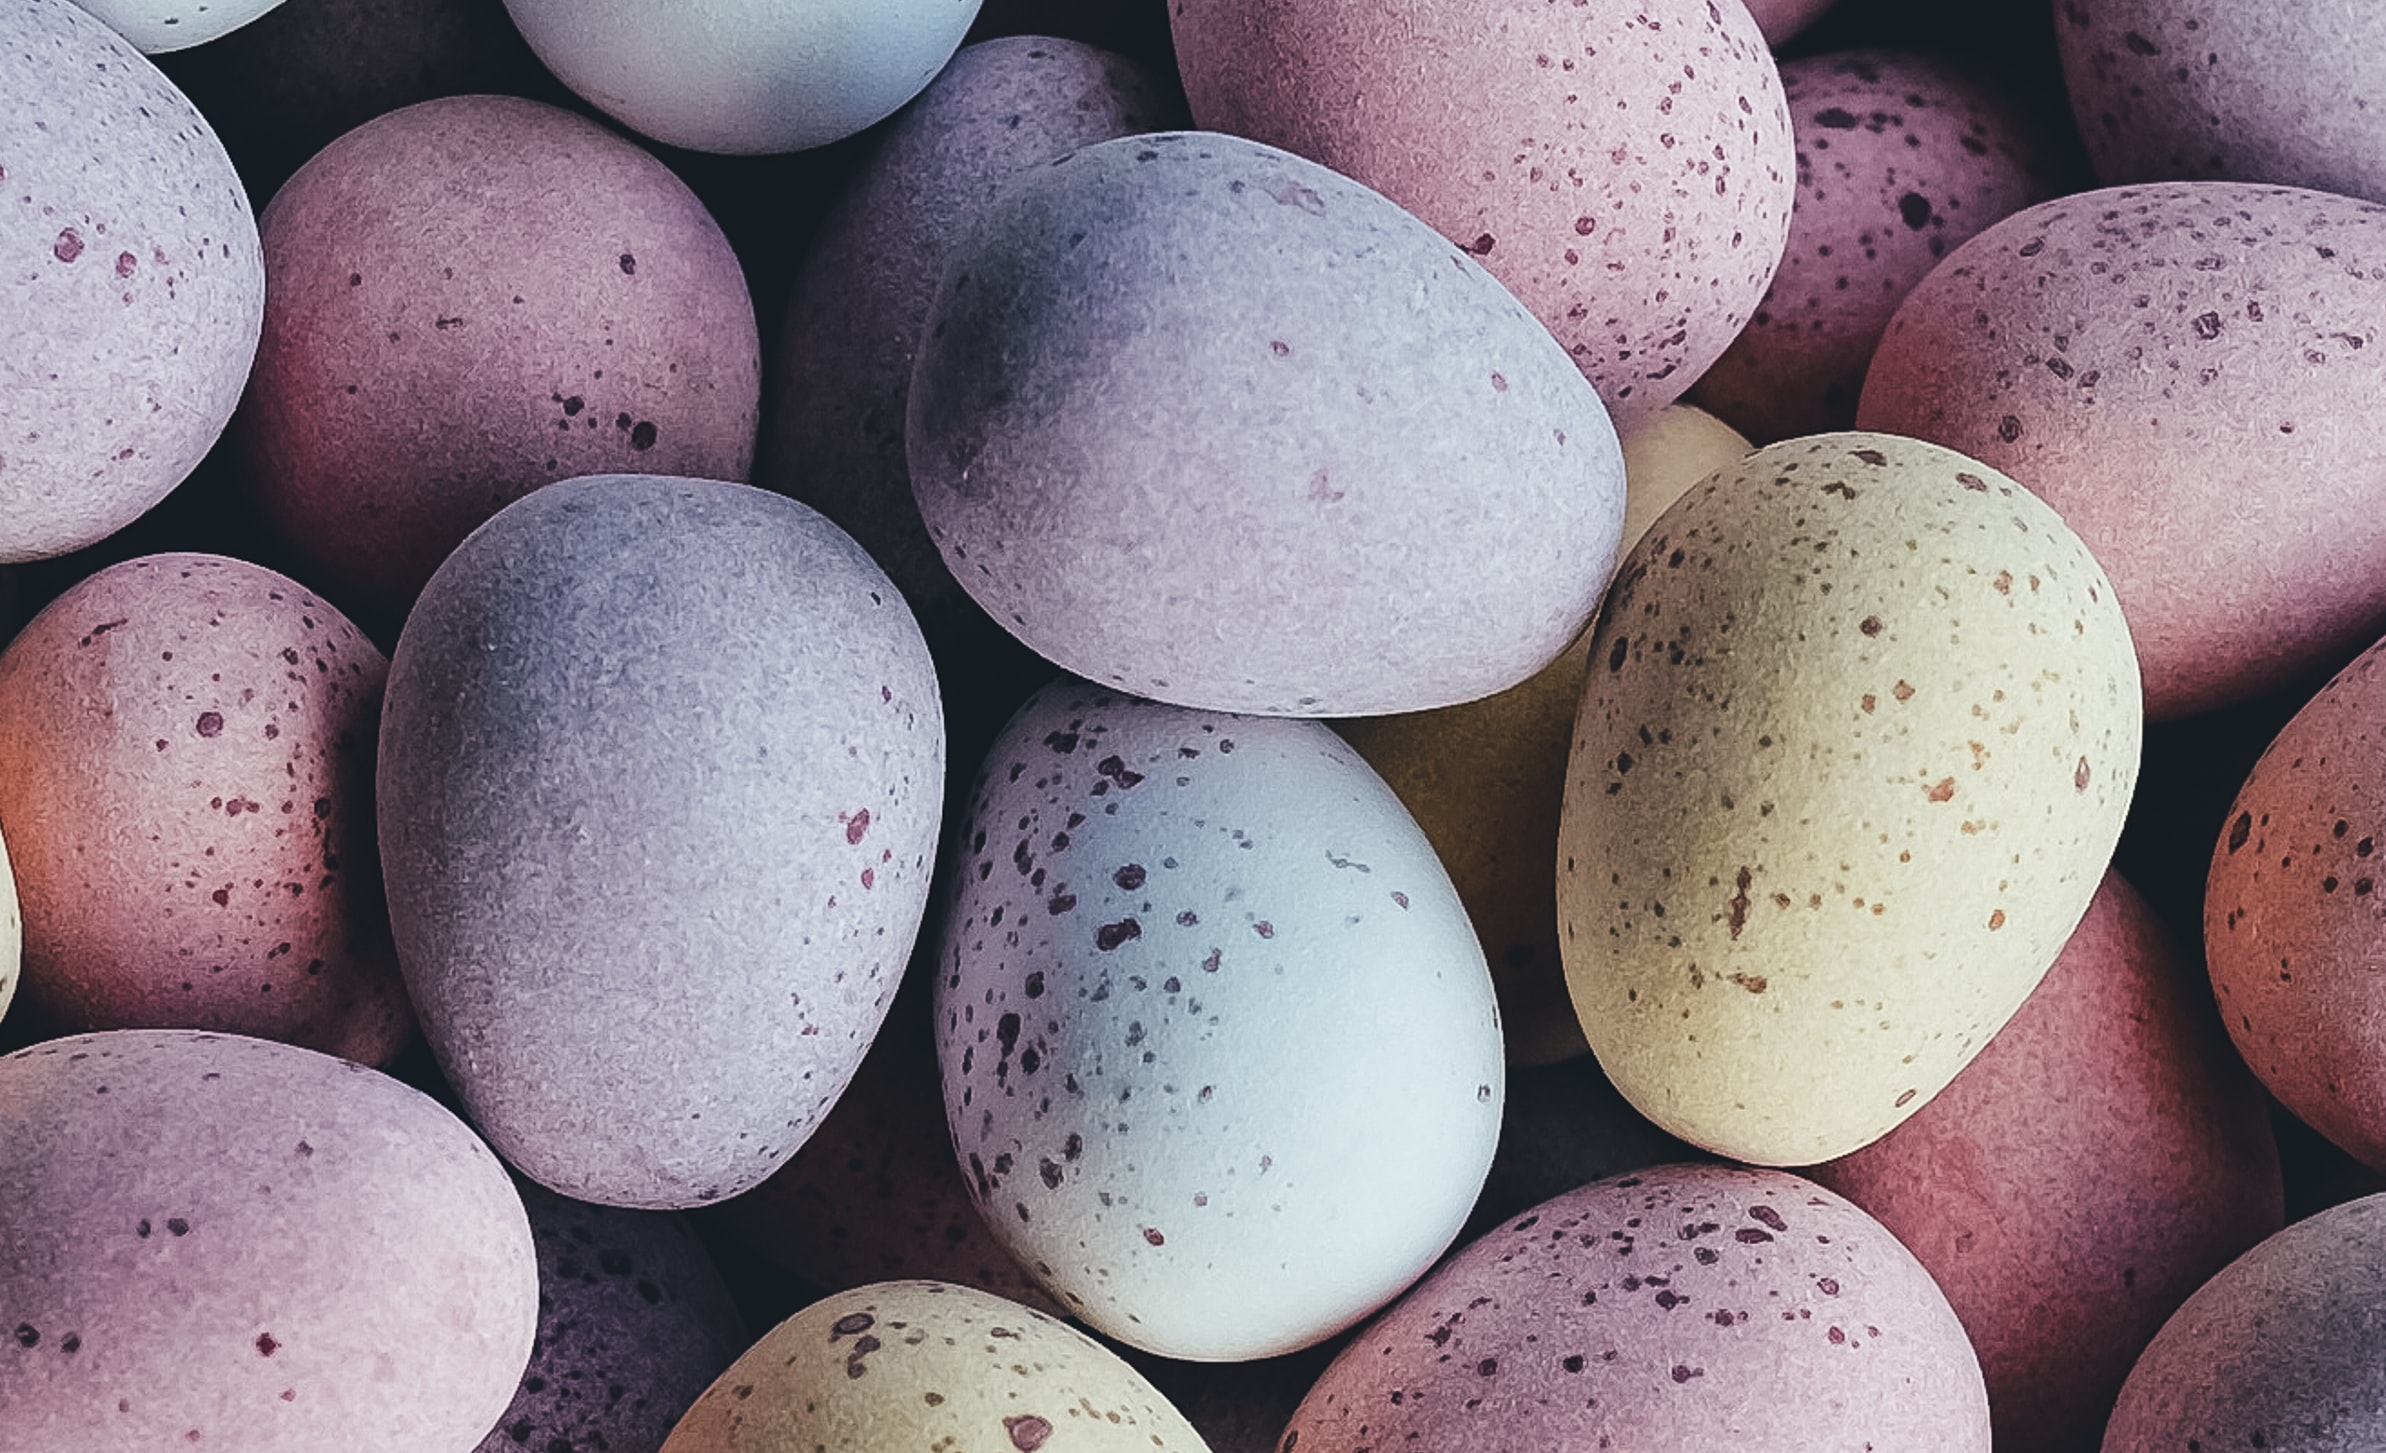 Coping With Infertility During Easter